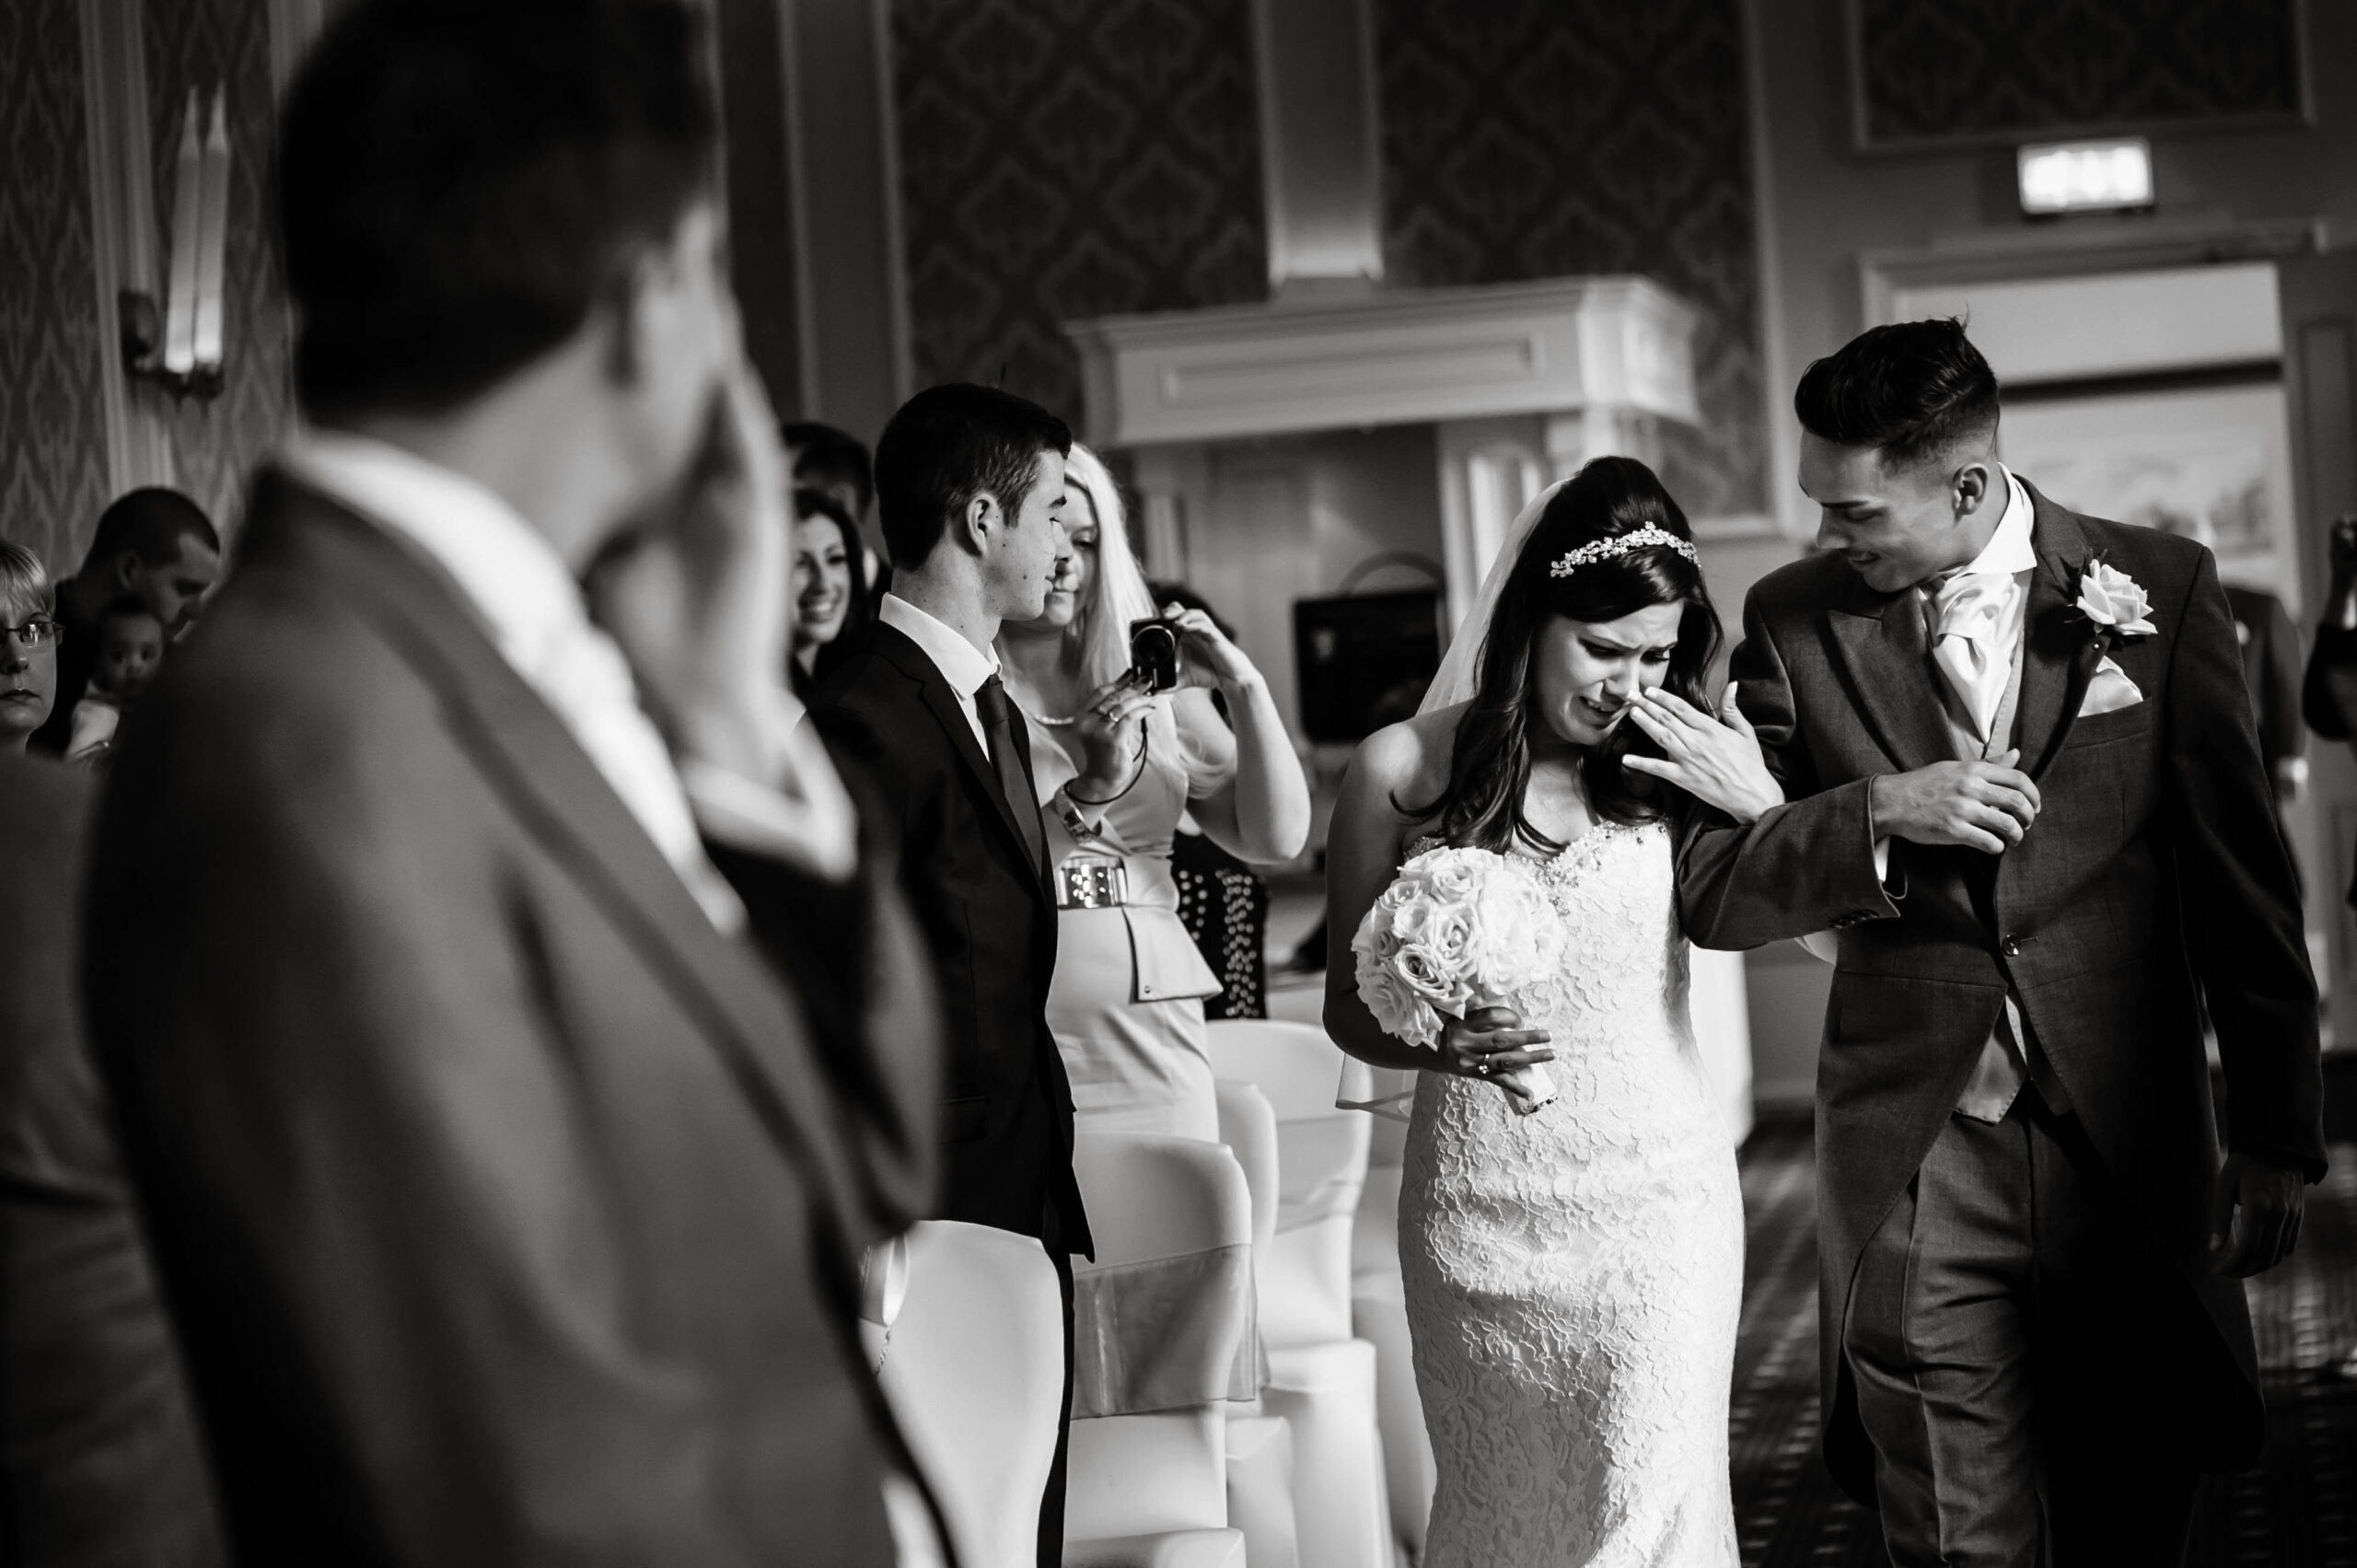 An emotional bride walking down the aisle, by Tori Deslauriers Photography